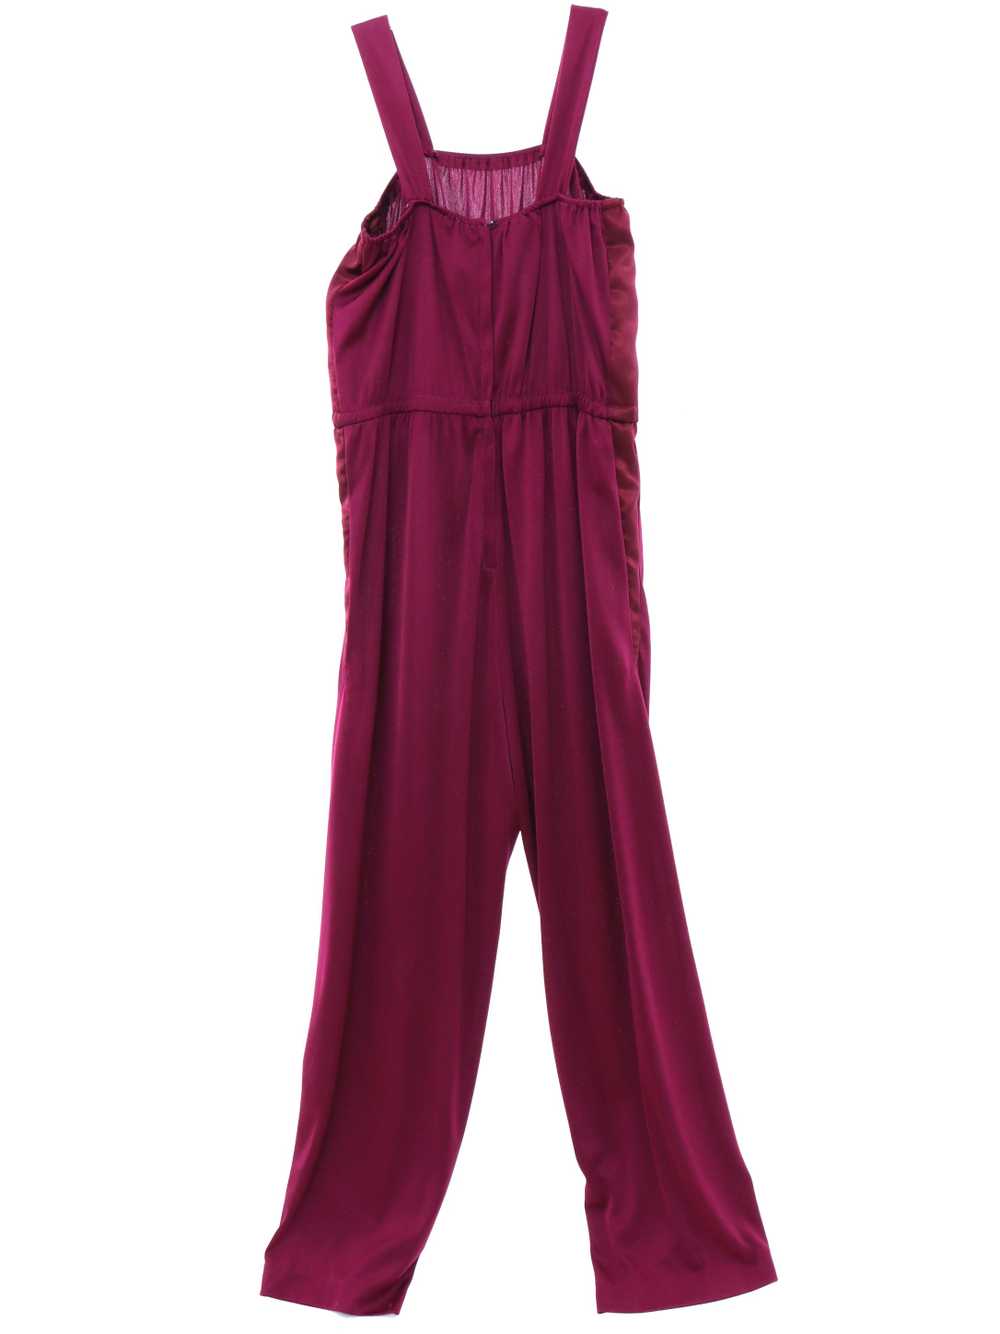 1980's Jodi Womens Totally 80s Jumpsuit - image 3